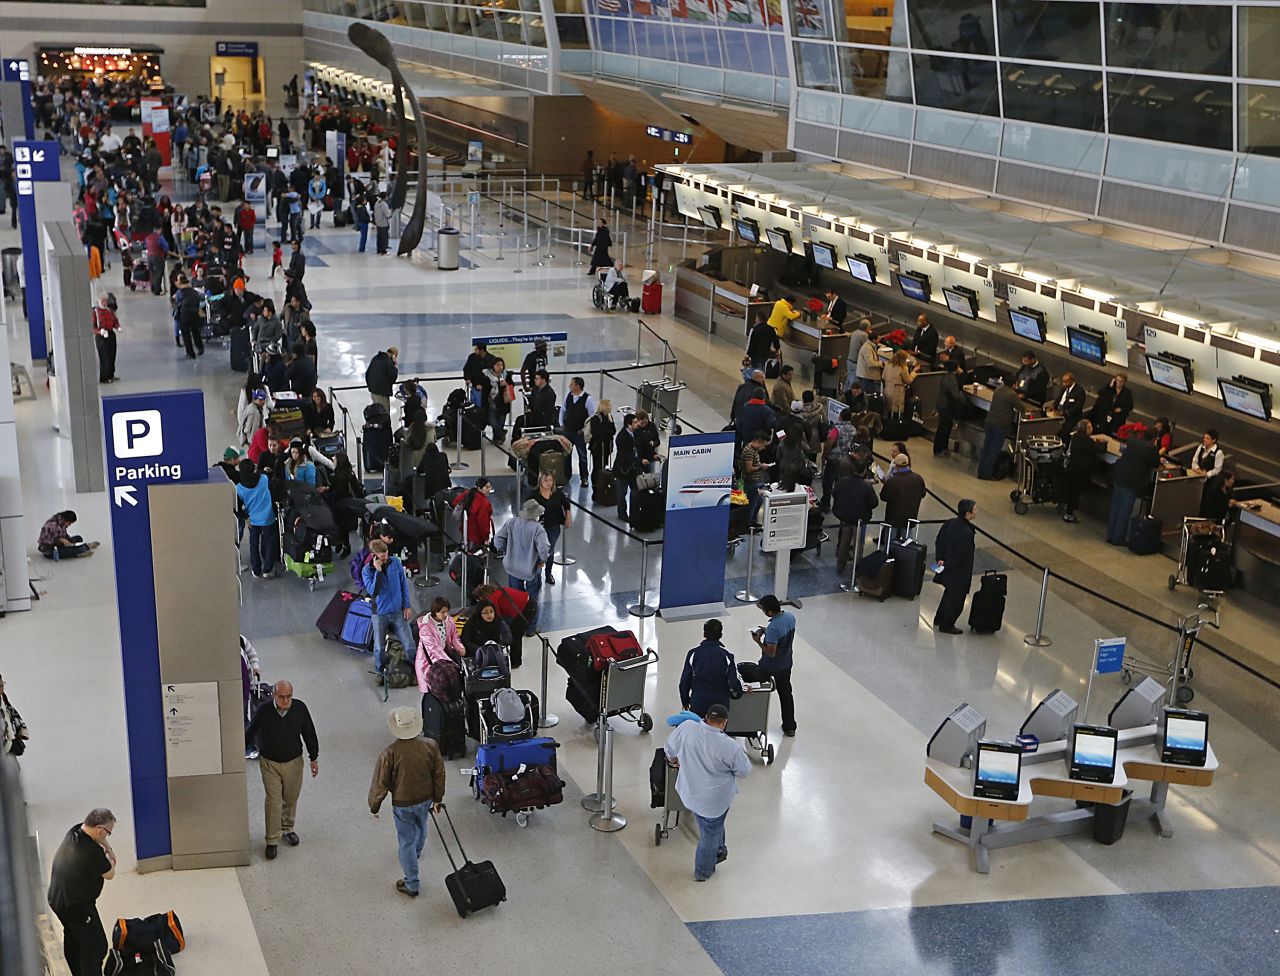 Dallas-Fort Worth International welcomed more than 65.5 million passengers in 2015 -- a 2.6% increase over the previous year, according to Airport Council International's 2015 passenger traffic results. The Texas facility dropped from ninth to tenth place.